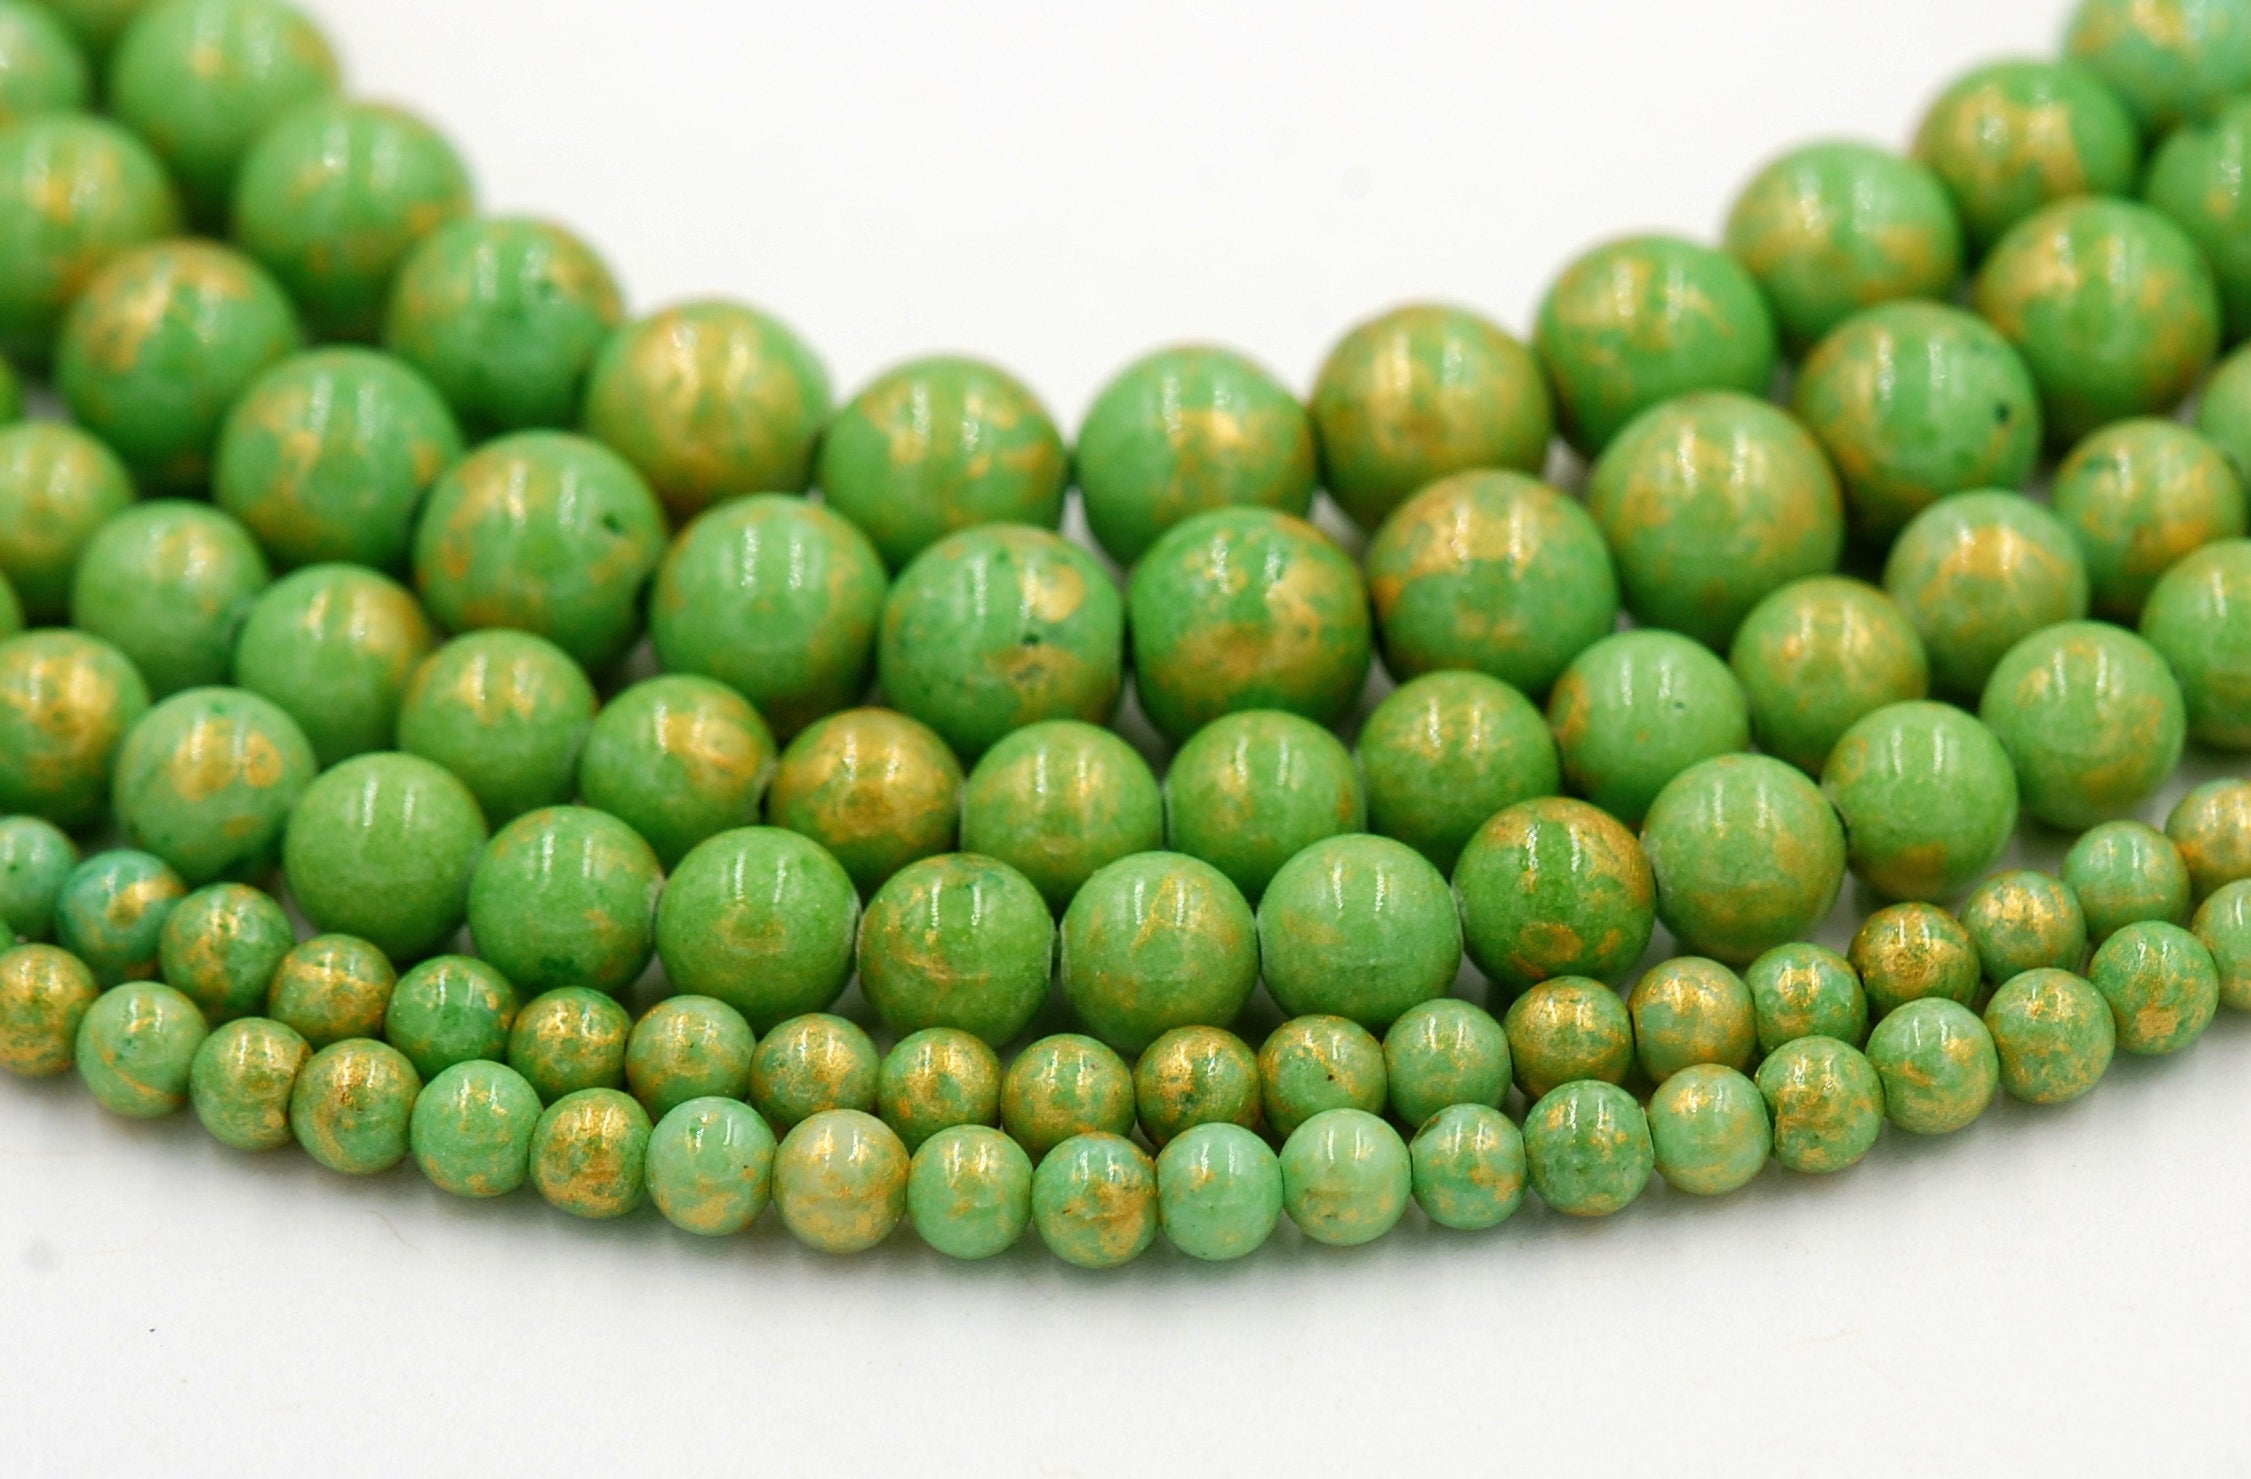 Apple Green Gold Dust Jade 4mm, 6mm, 8mm, 10mm, 12mm Round Beads -15 inch strand